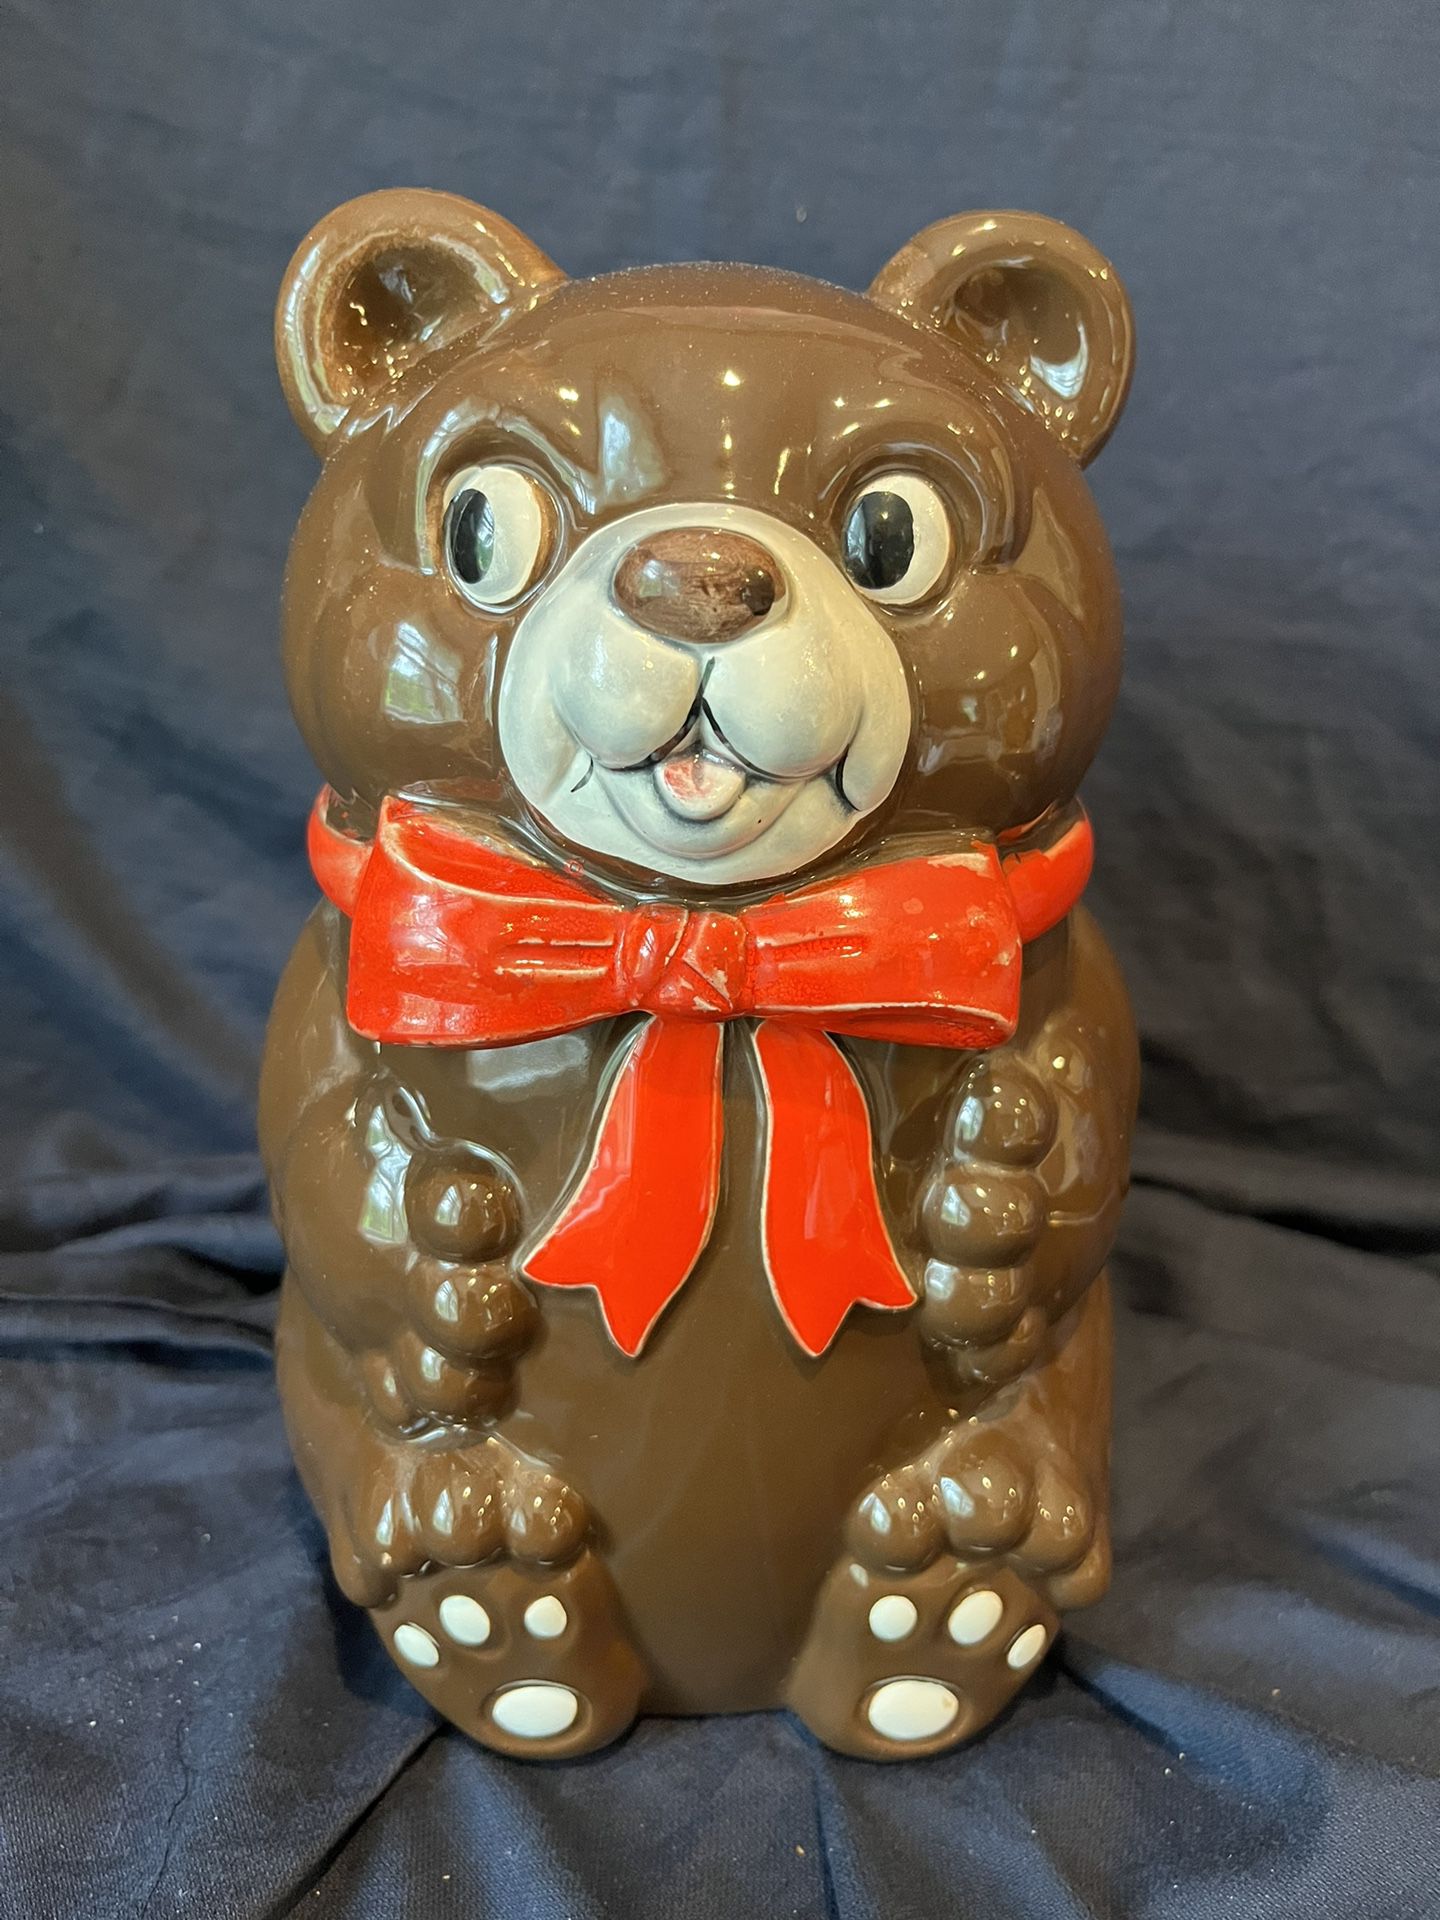 Vintage Japanese Teddy Bear Cookie Jar With Red Bow